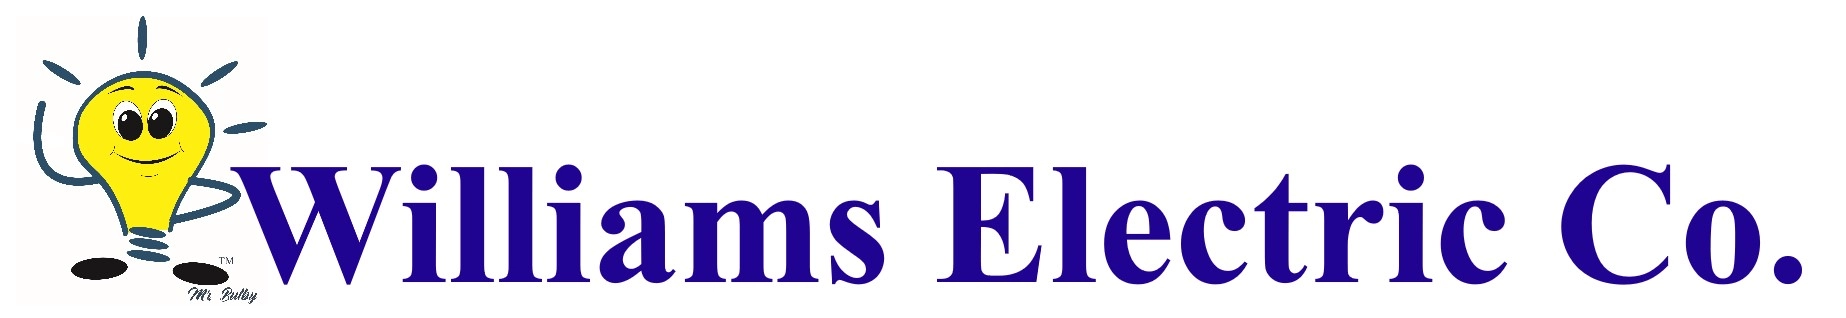 Williams Electric Co. Electrical Contractor and Supplies Logo